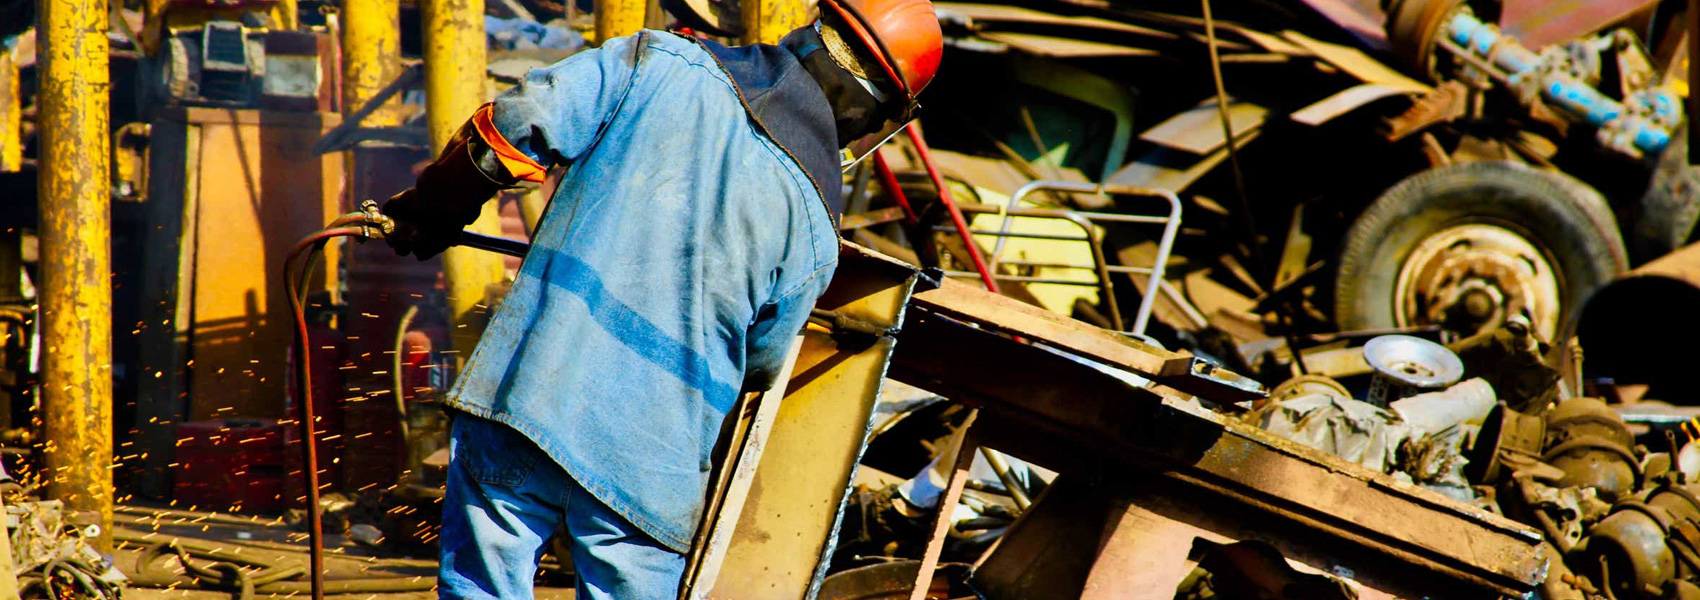 8 Interesting Things about Scrap Metal Recycling In 2020